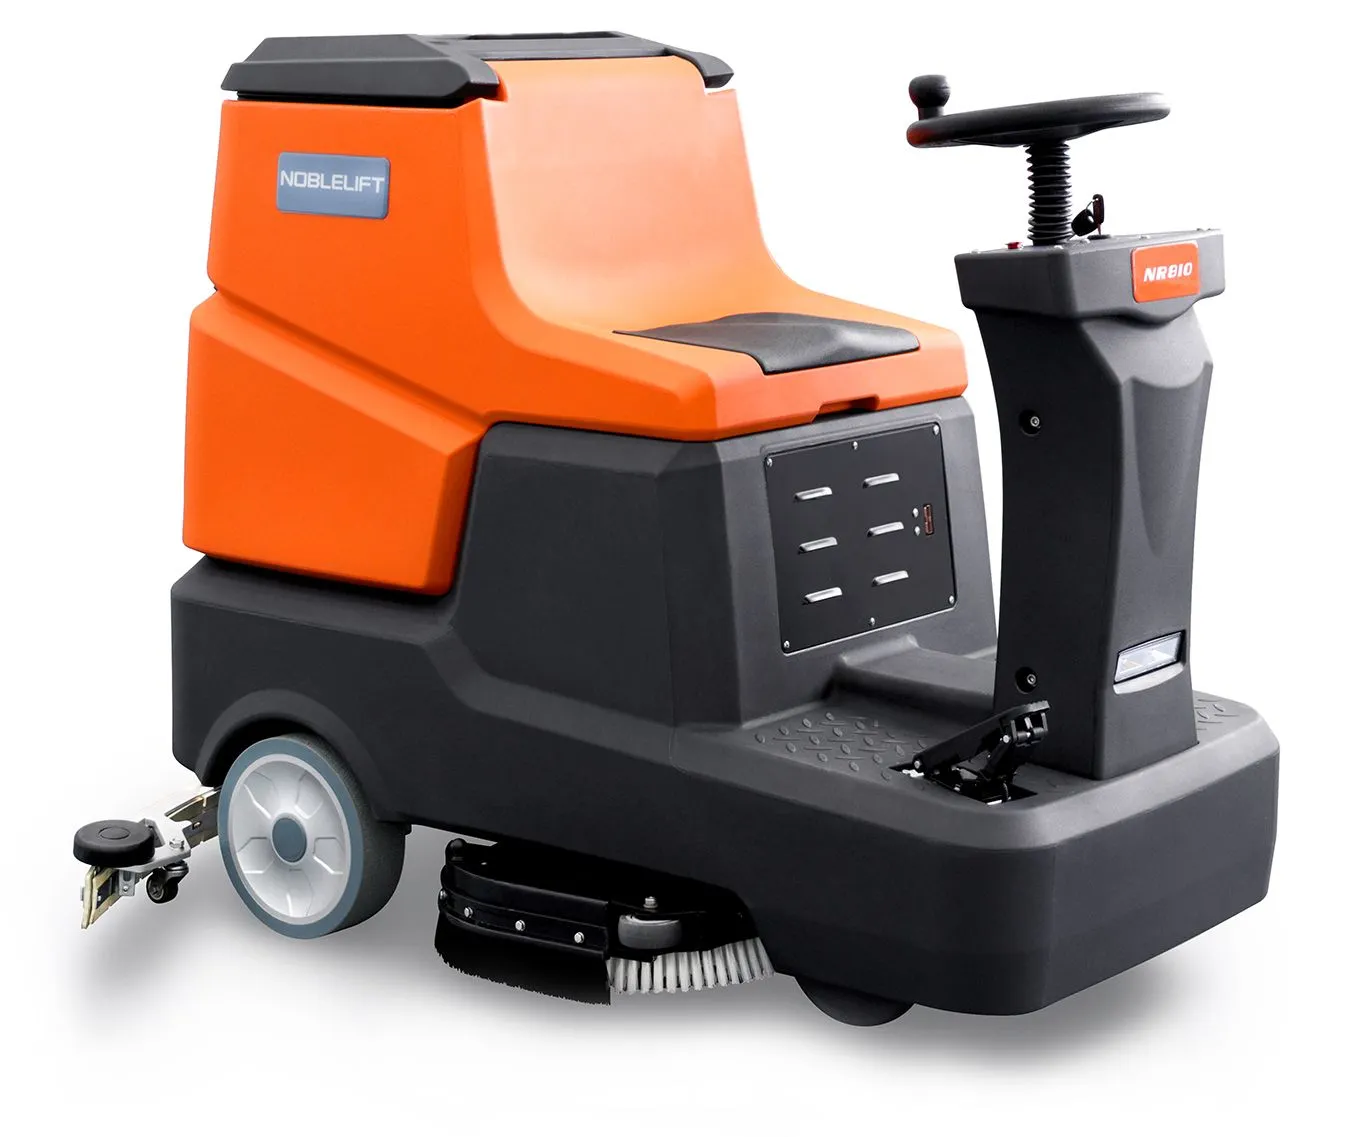 Noblelift-NR810-Electric-Industrial-Scrubbers-Main-1920w